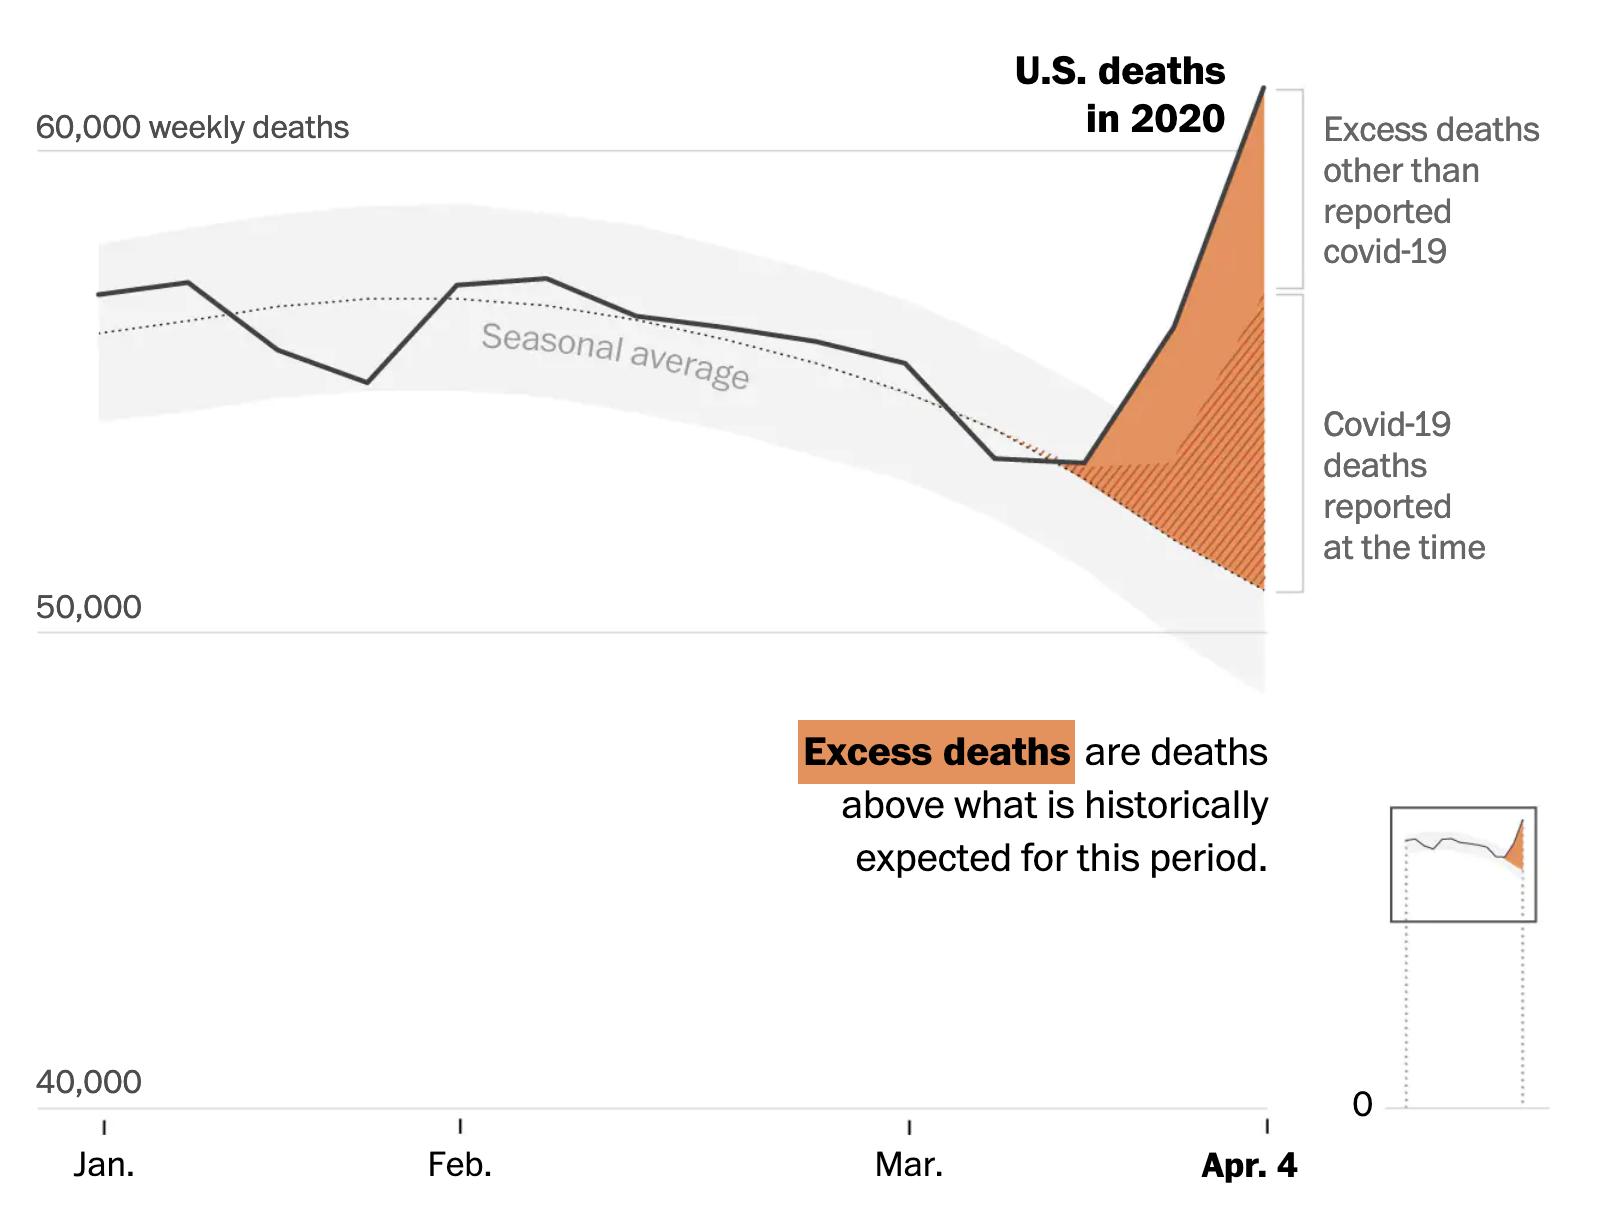 U.S. deaths soared in early weeks of pandemic, far exceeding number attributed to covid-19